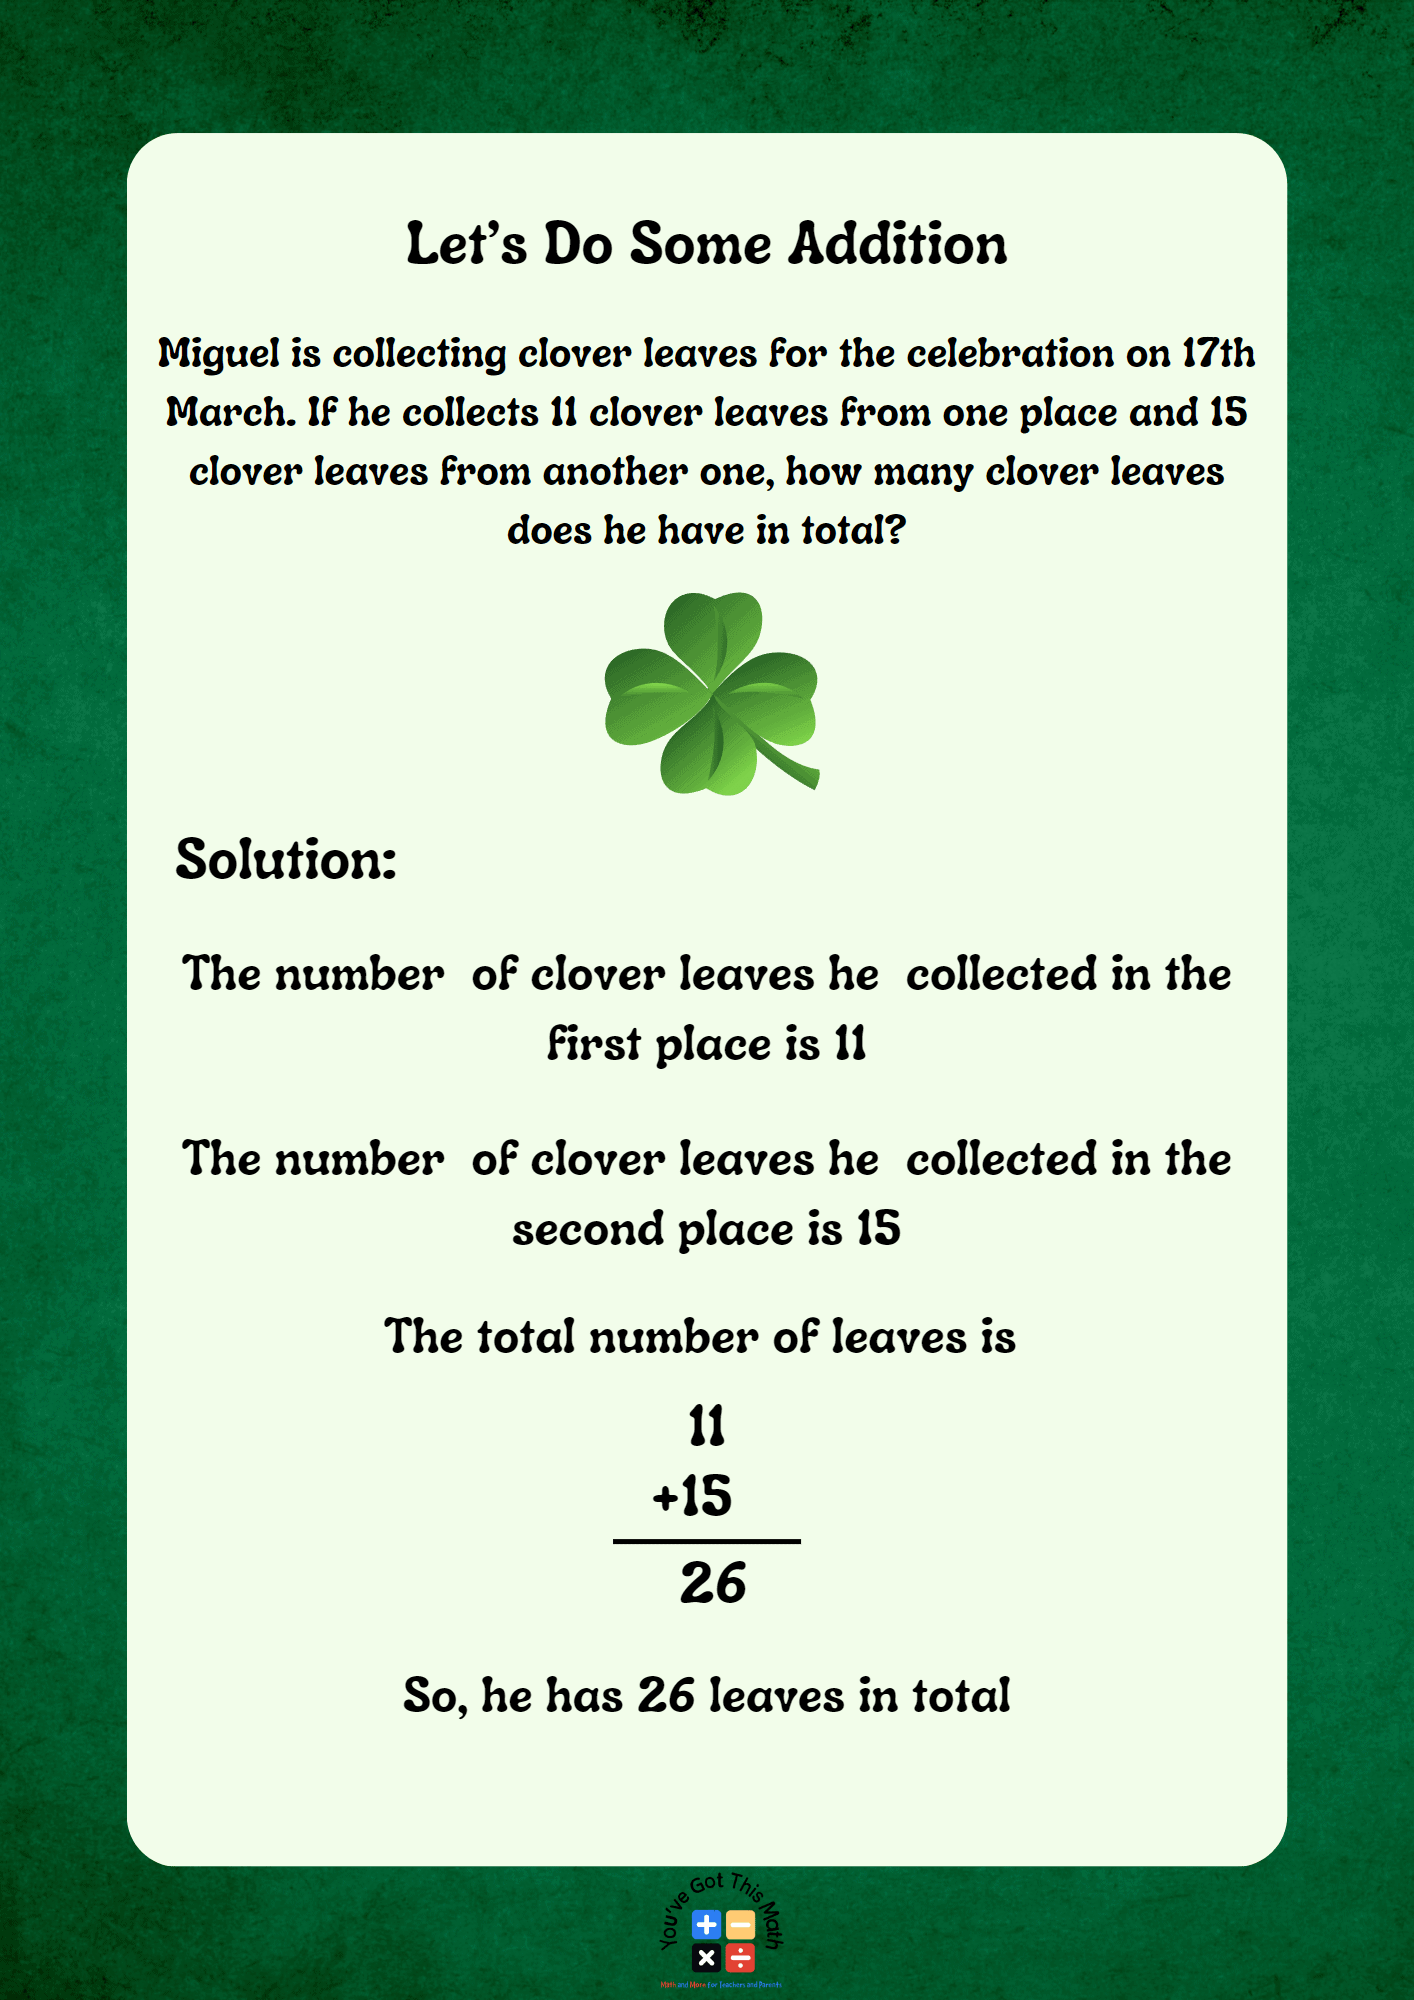 Doing Addition as An Example of St Patrick's Day Word Problems